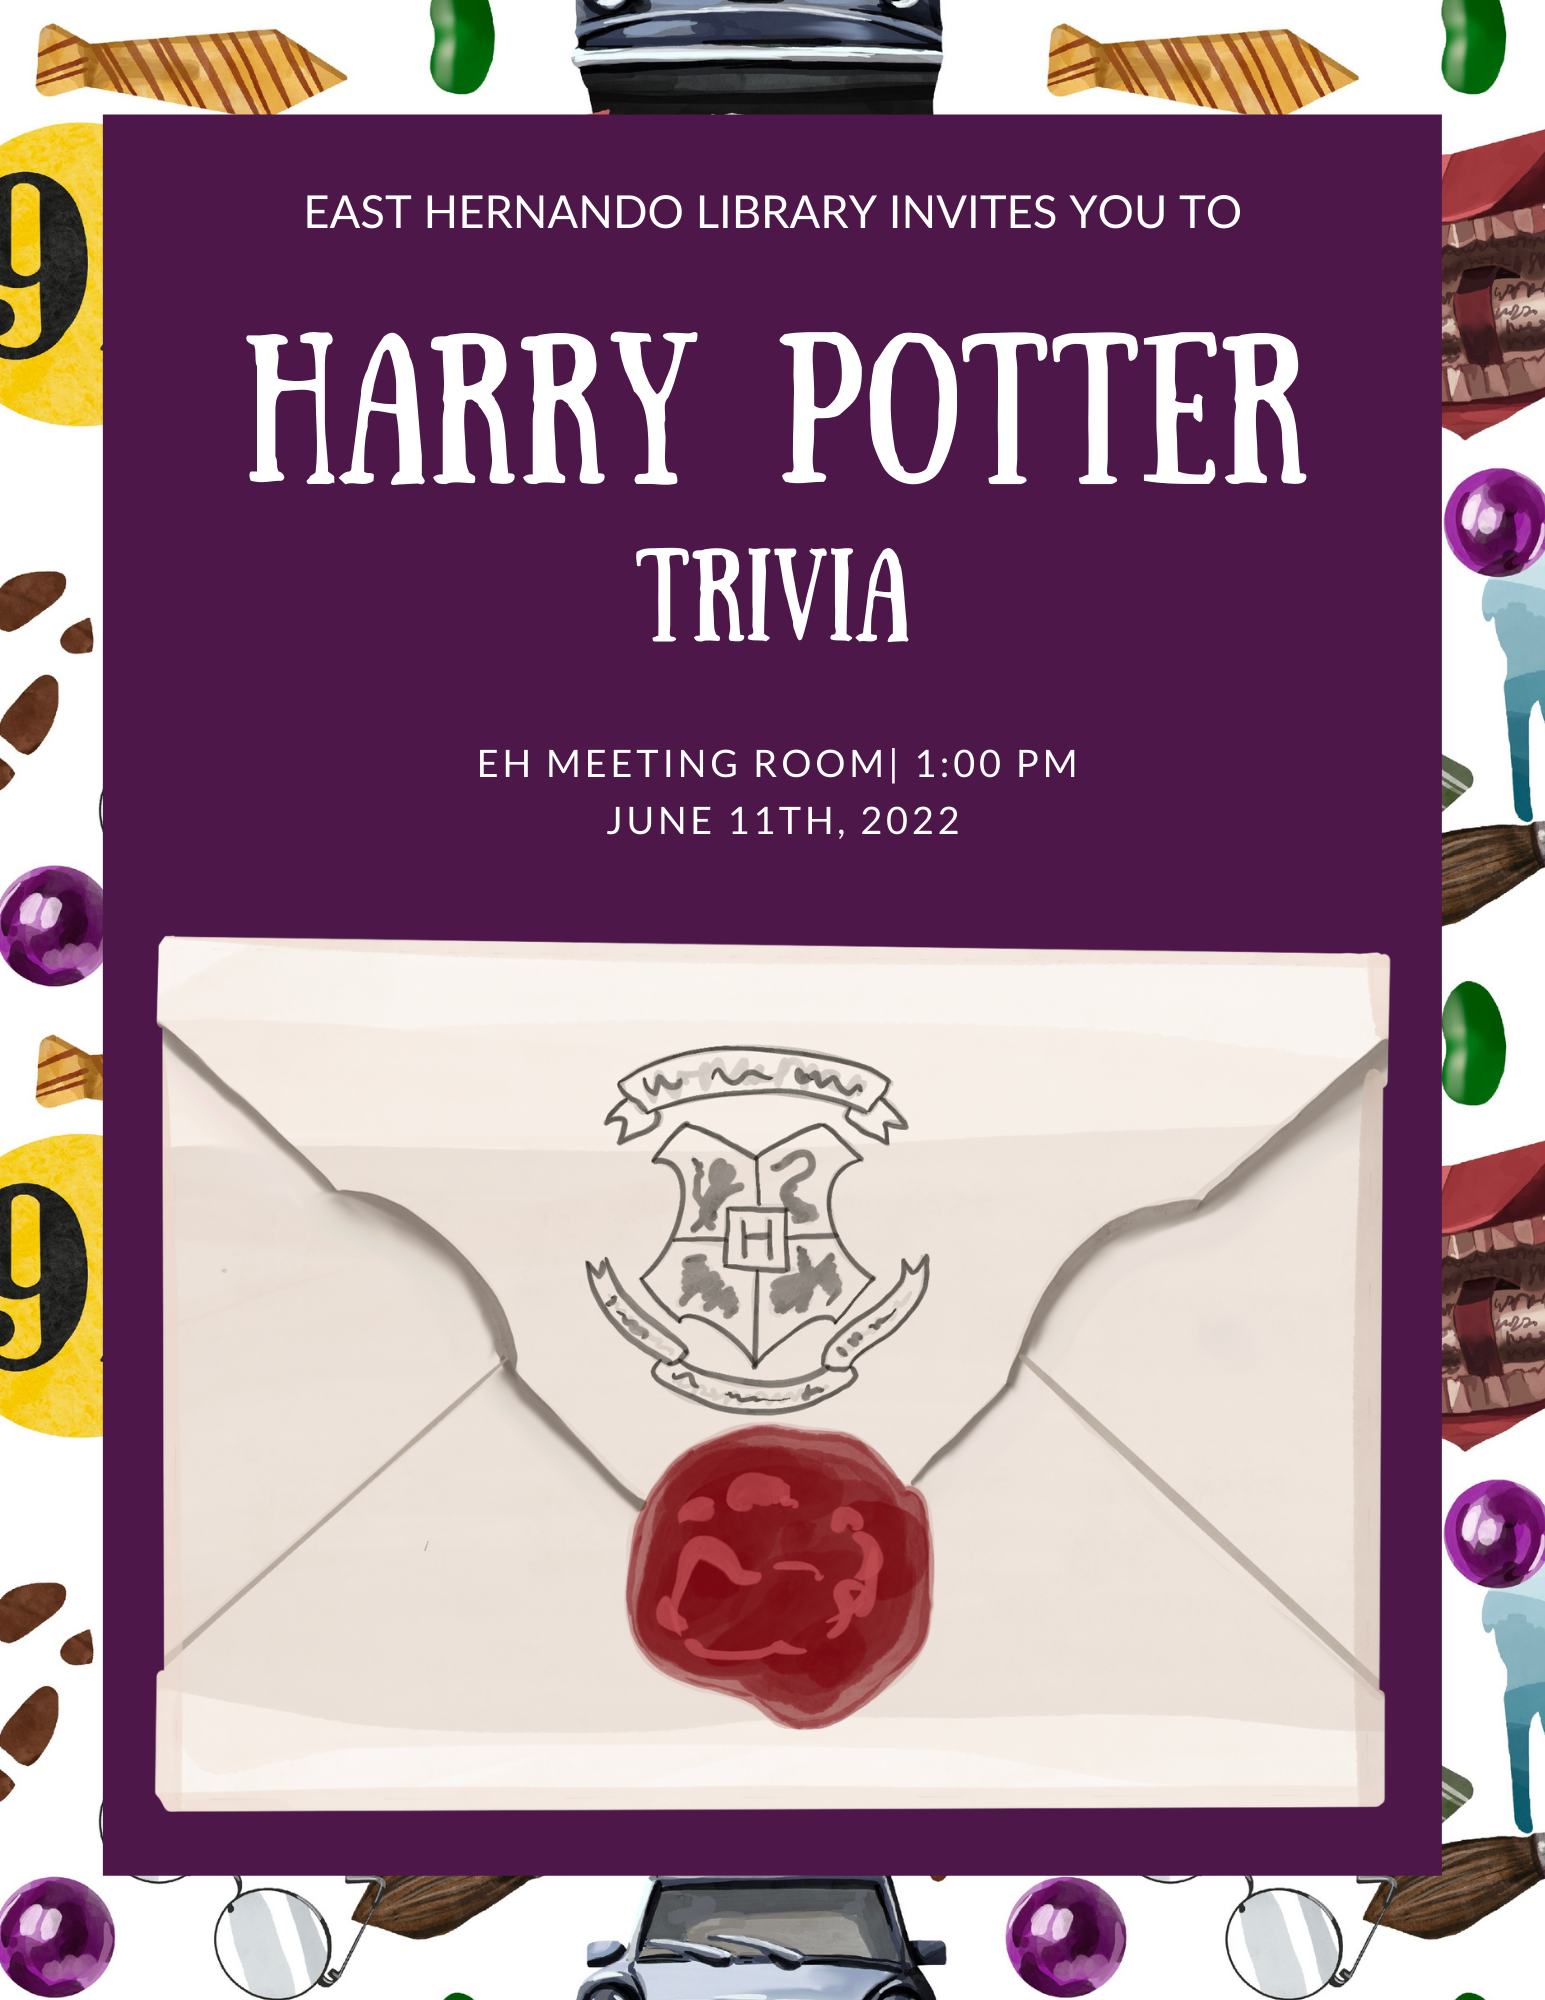 harry-potter-trivia-your-library-hernando-county-public-library-system